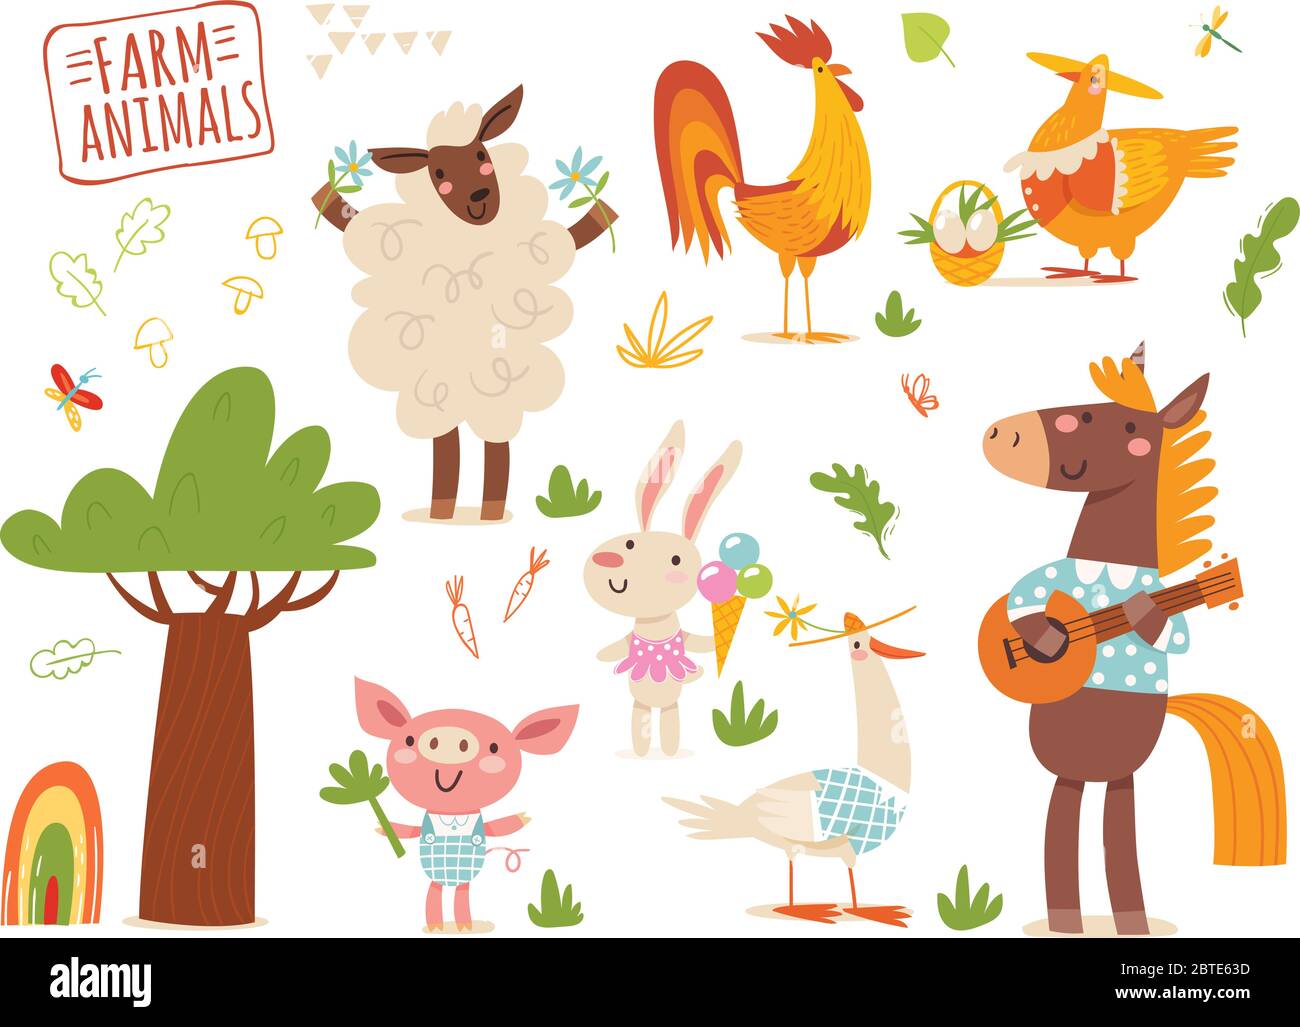 Set of funny hand drawn farm country animals. Stock Vector